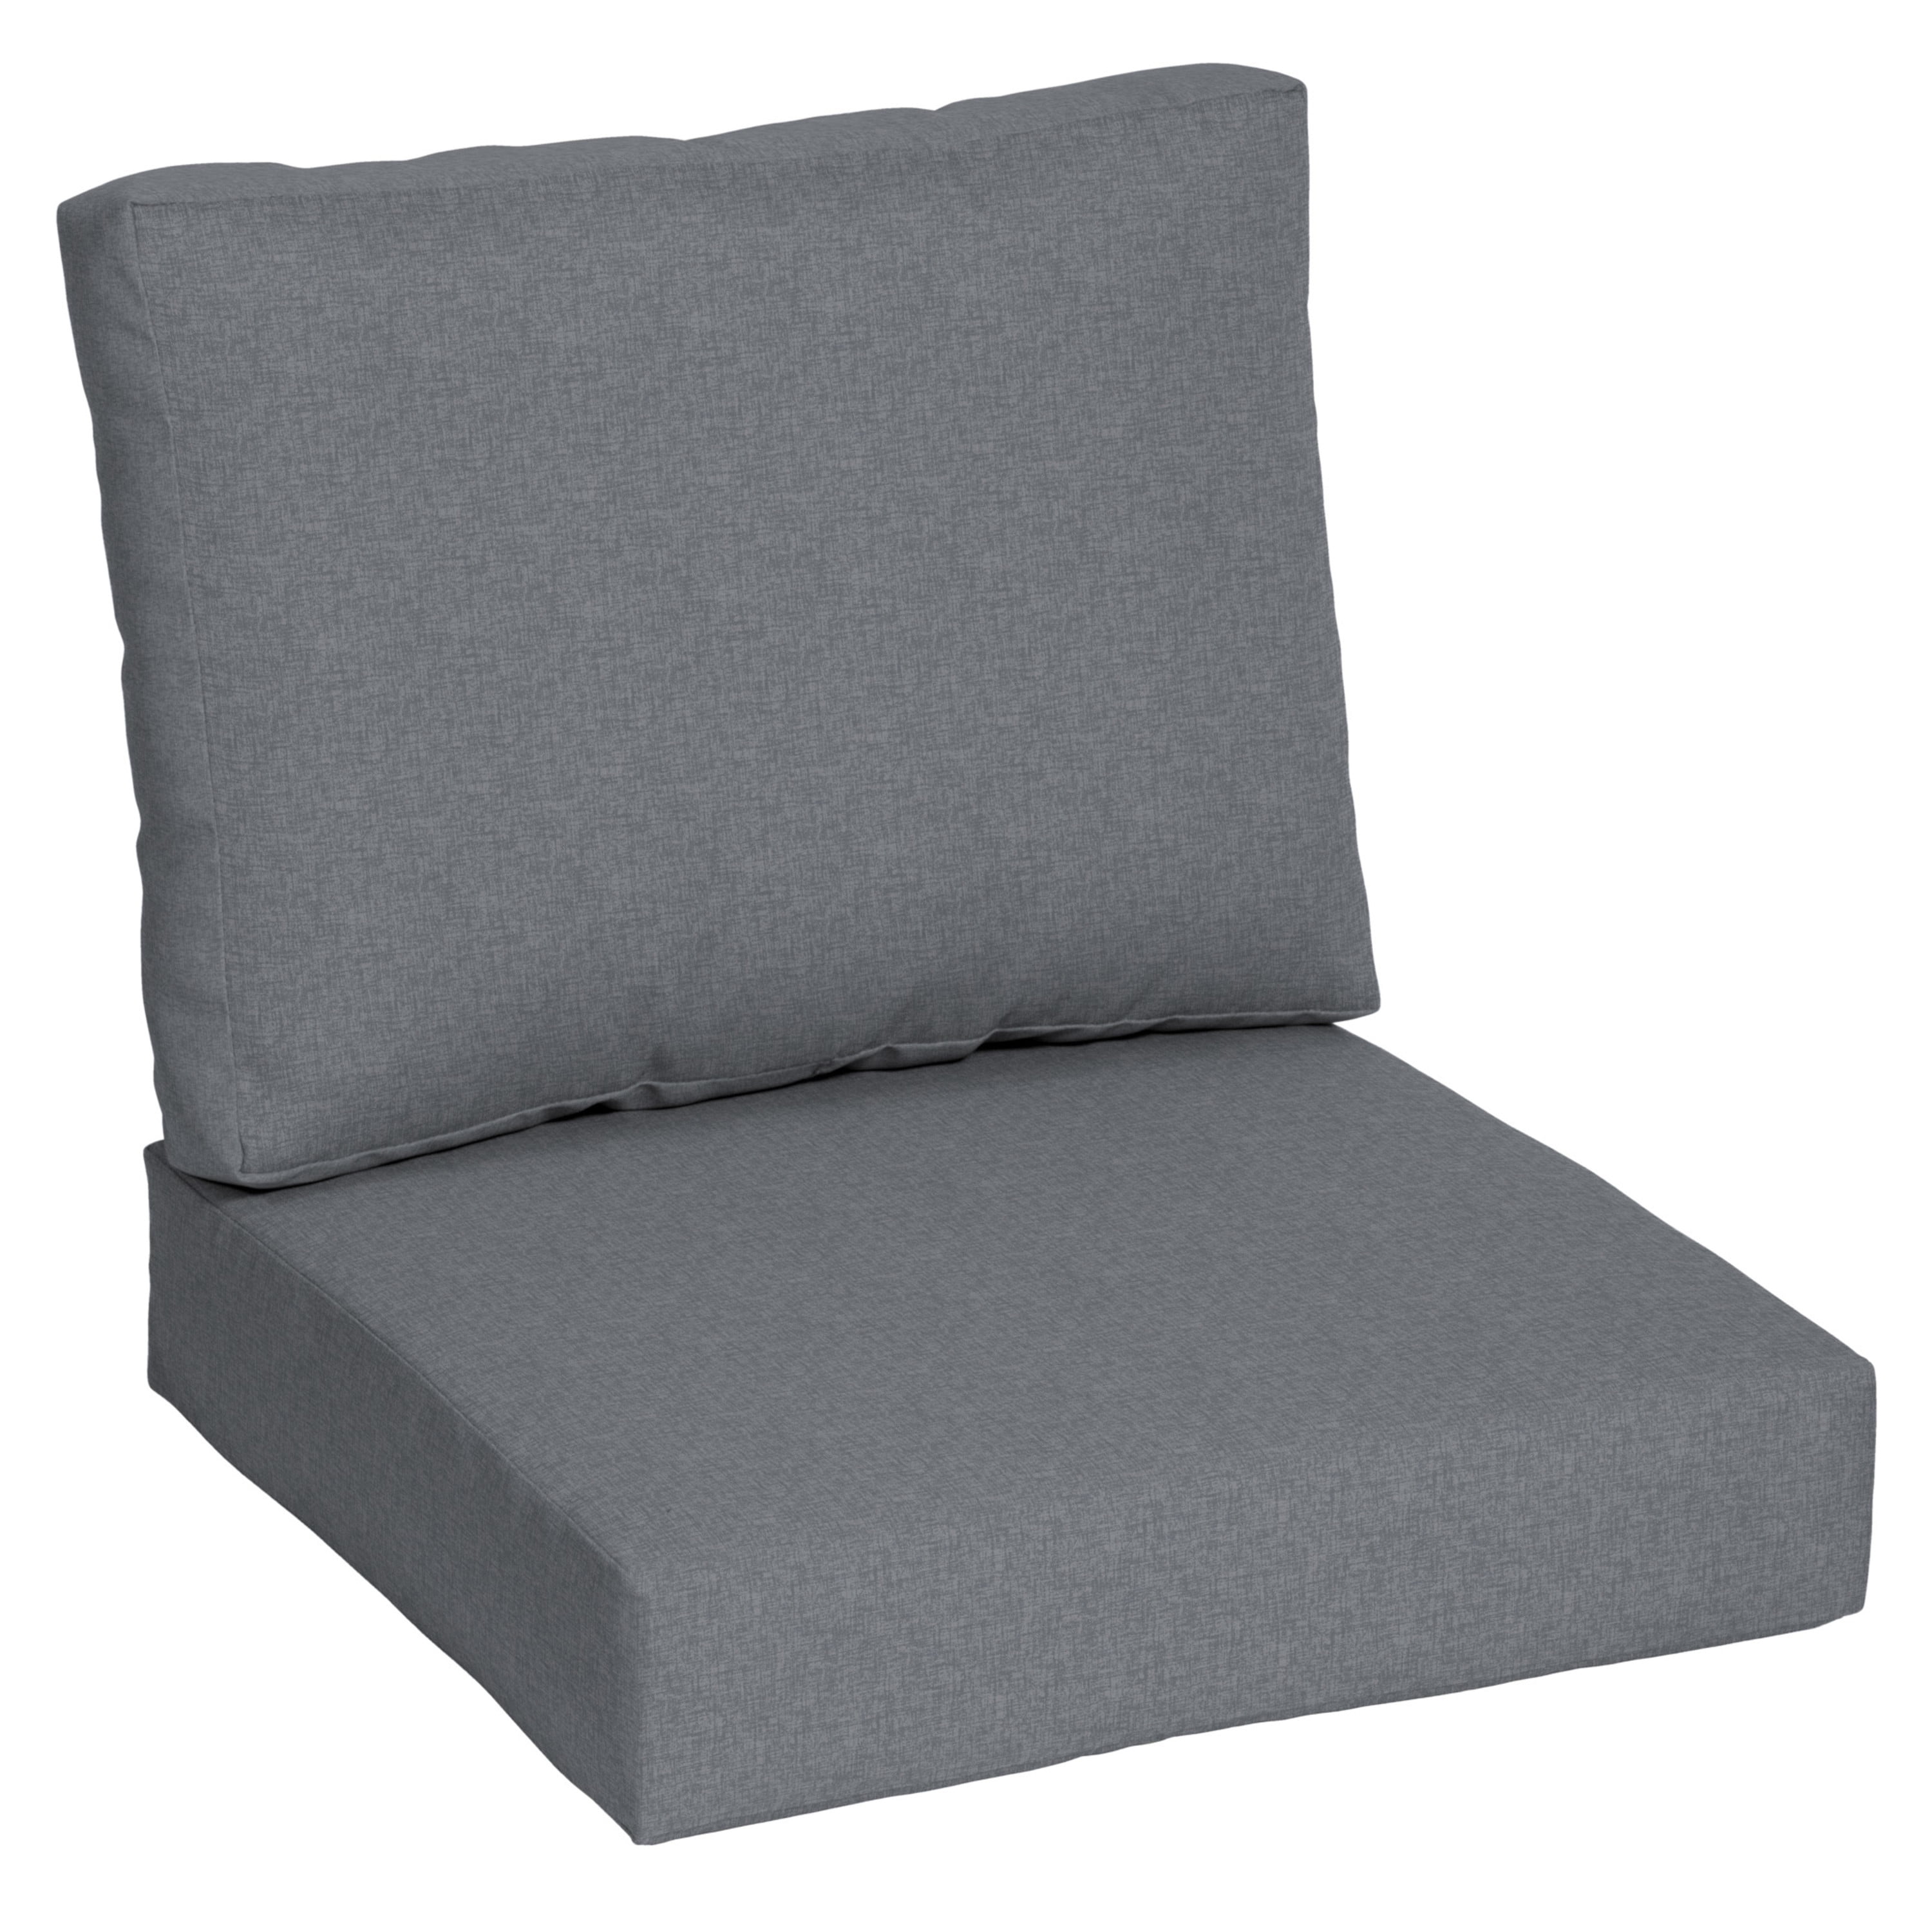 2-Pack, Savvy-Finds Inflatable Seat Cushion (Grey), Portable Chair Cushion,  Travel Cushion, Outdoor Cushion, Seat Pad, Camping Seat, Boat Seat